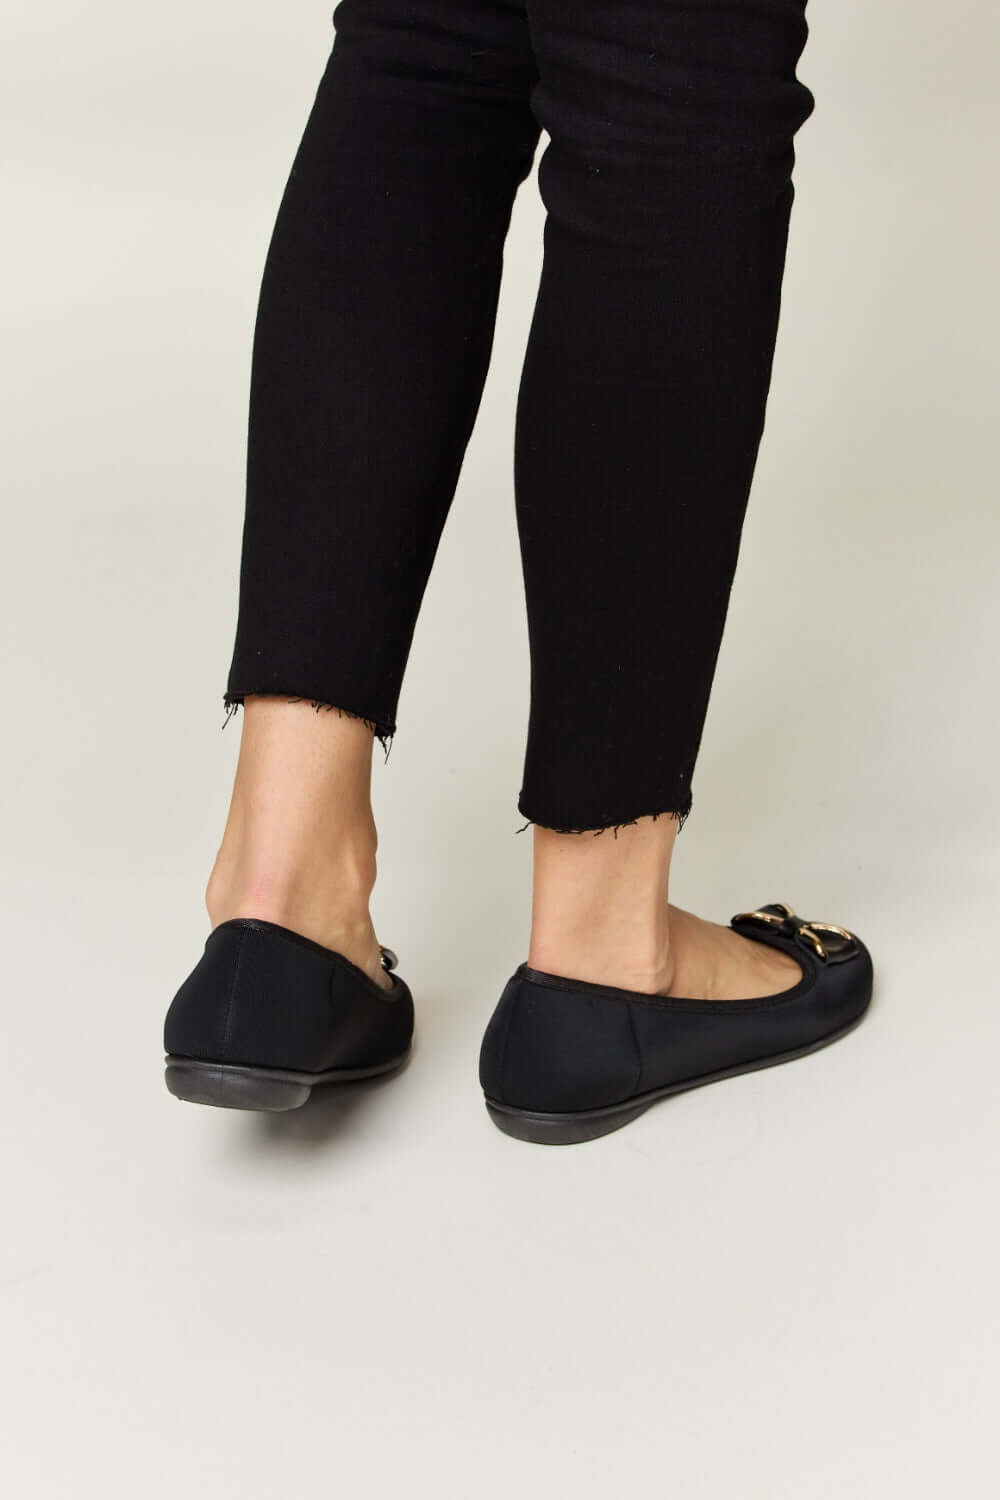 FOREVER LINK Metal Buckle Flat Loafers at Bella Road